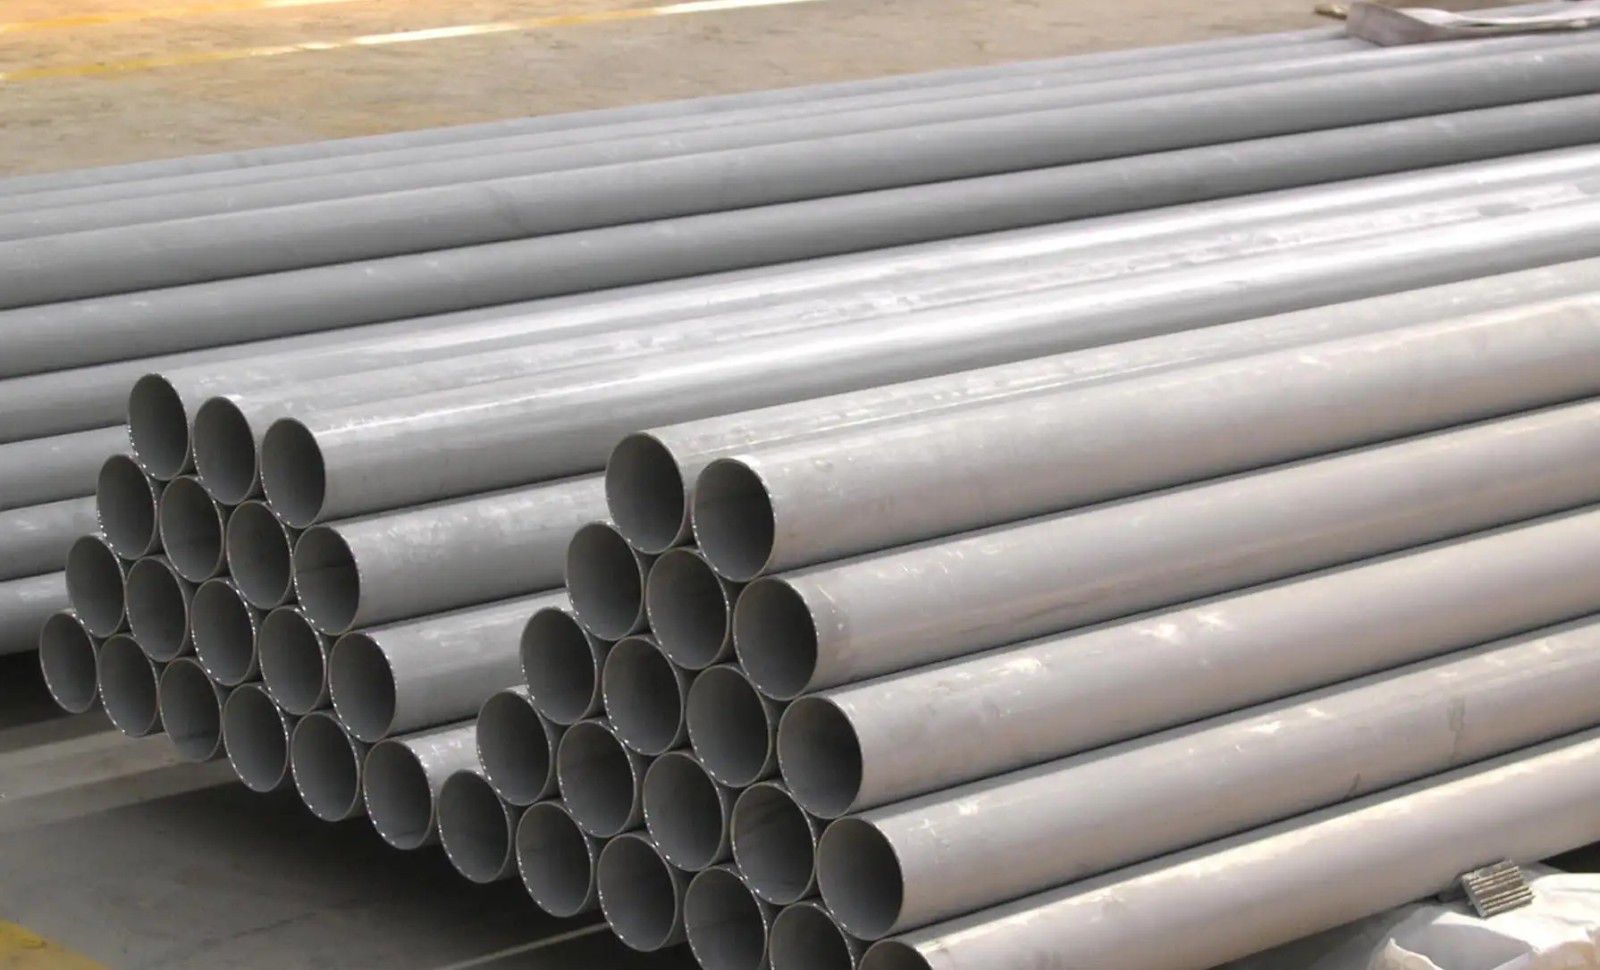 WorcesterPrice of 316Ti stainless steel pipeAnalysis of the operating specifications